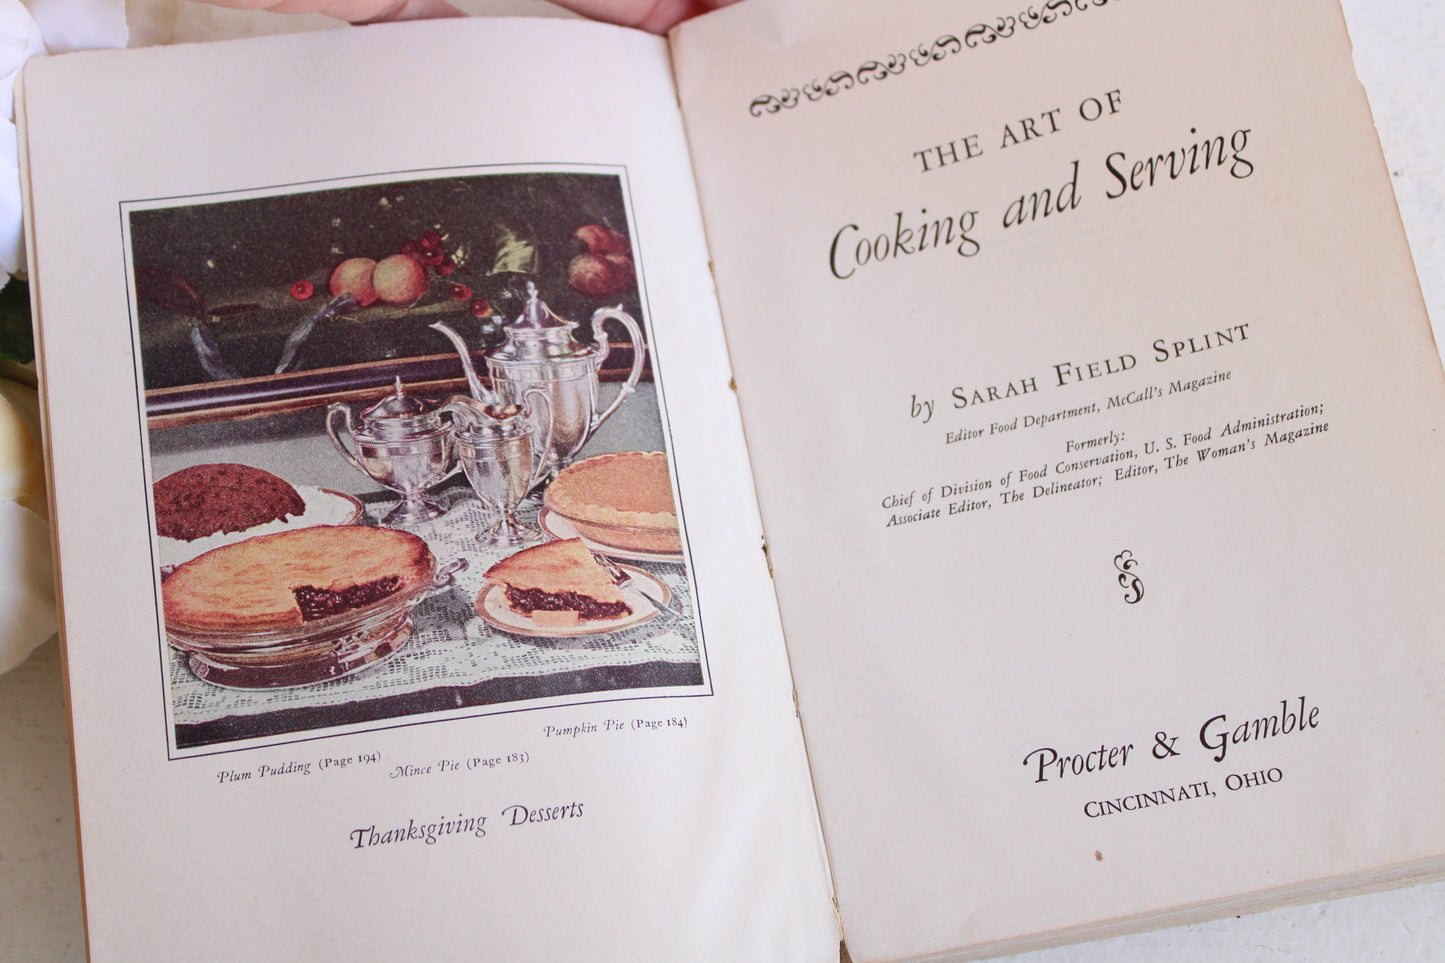 Vintage 1930s Cook Book "The Art of Cooking and Serving" by Sarah Field Splint